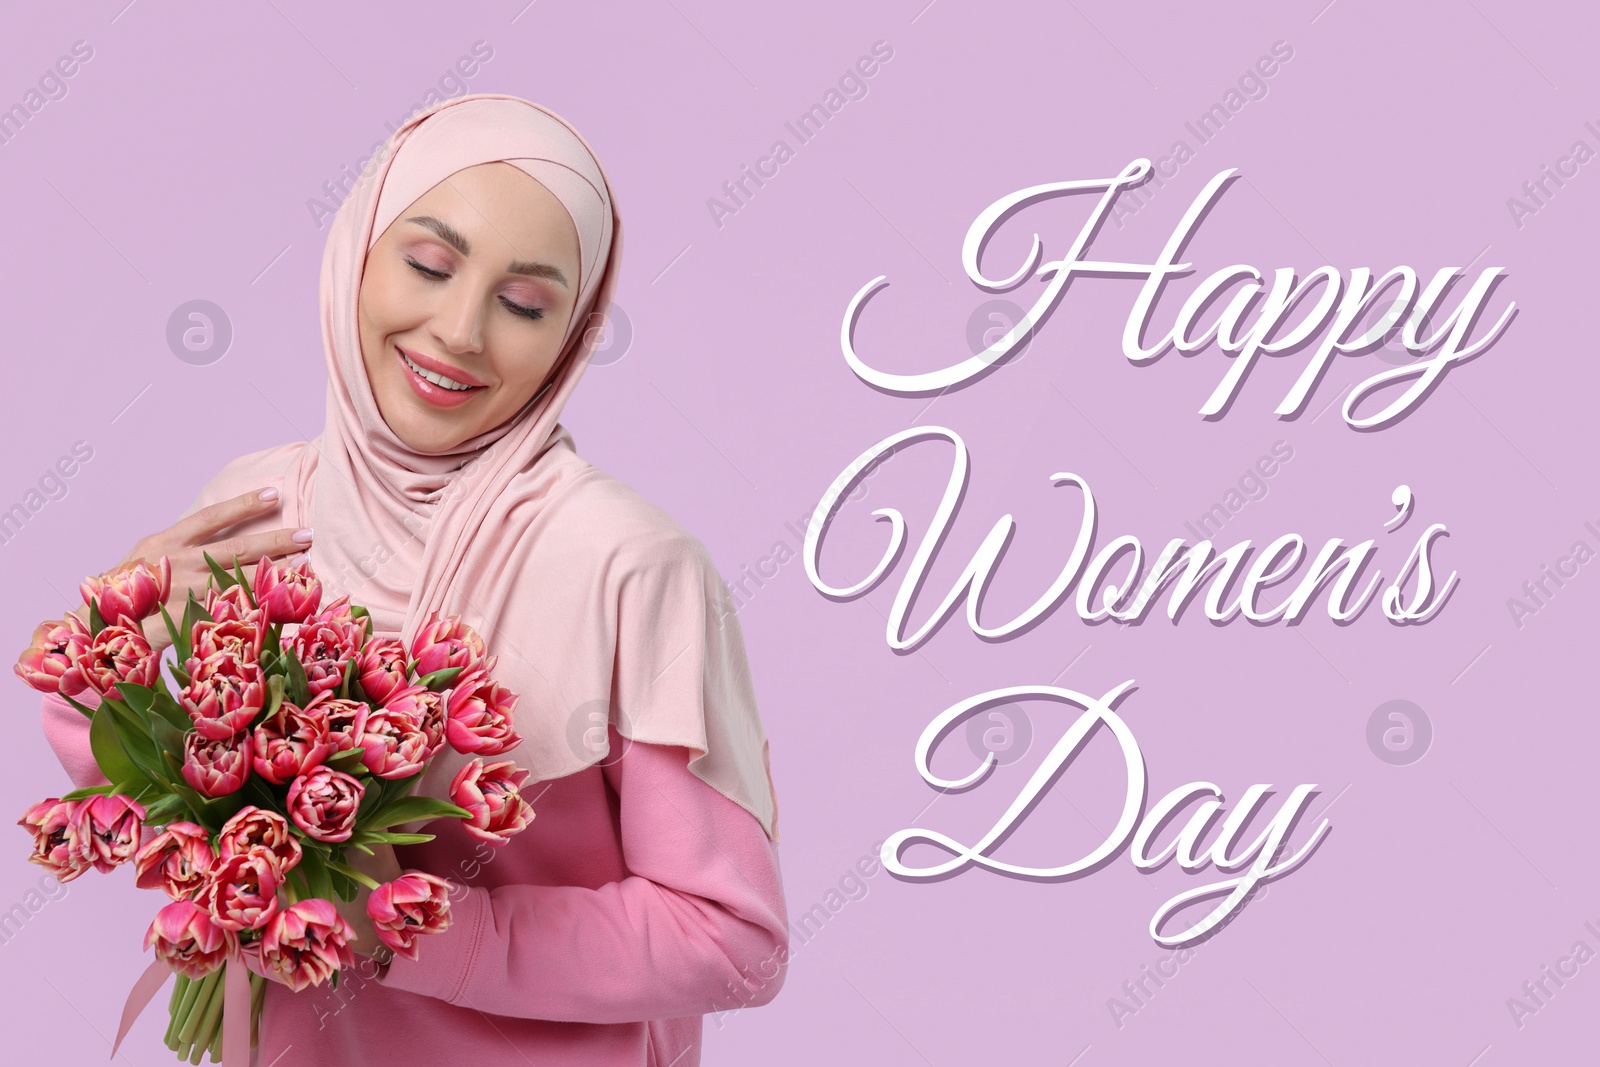 Image of Happy Women's Day - March 8. Attractive lady in hijab with bouquet of tulips on light violet background